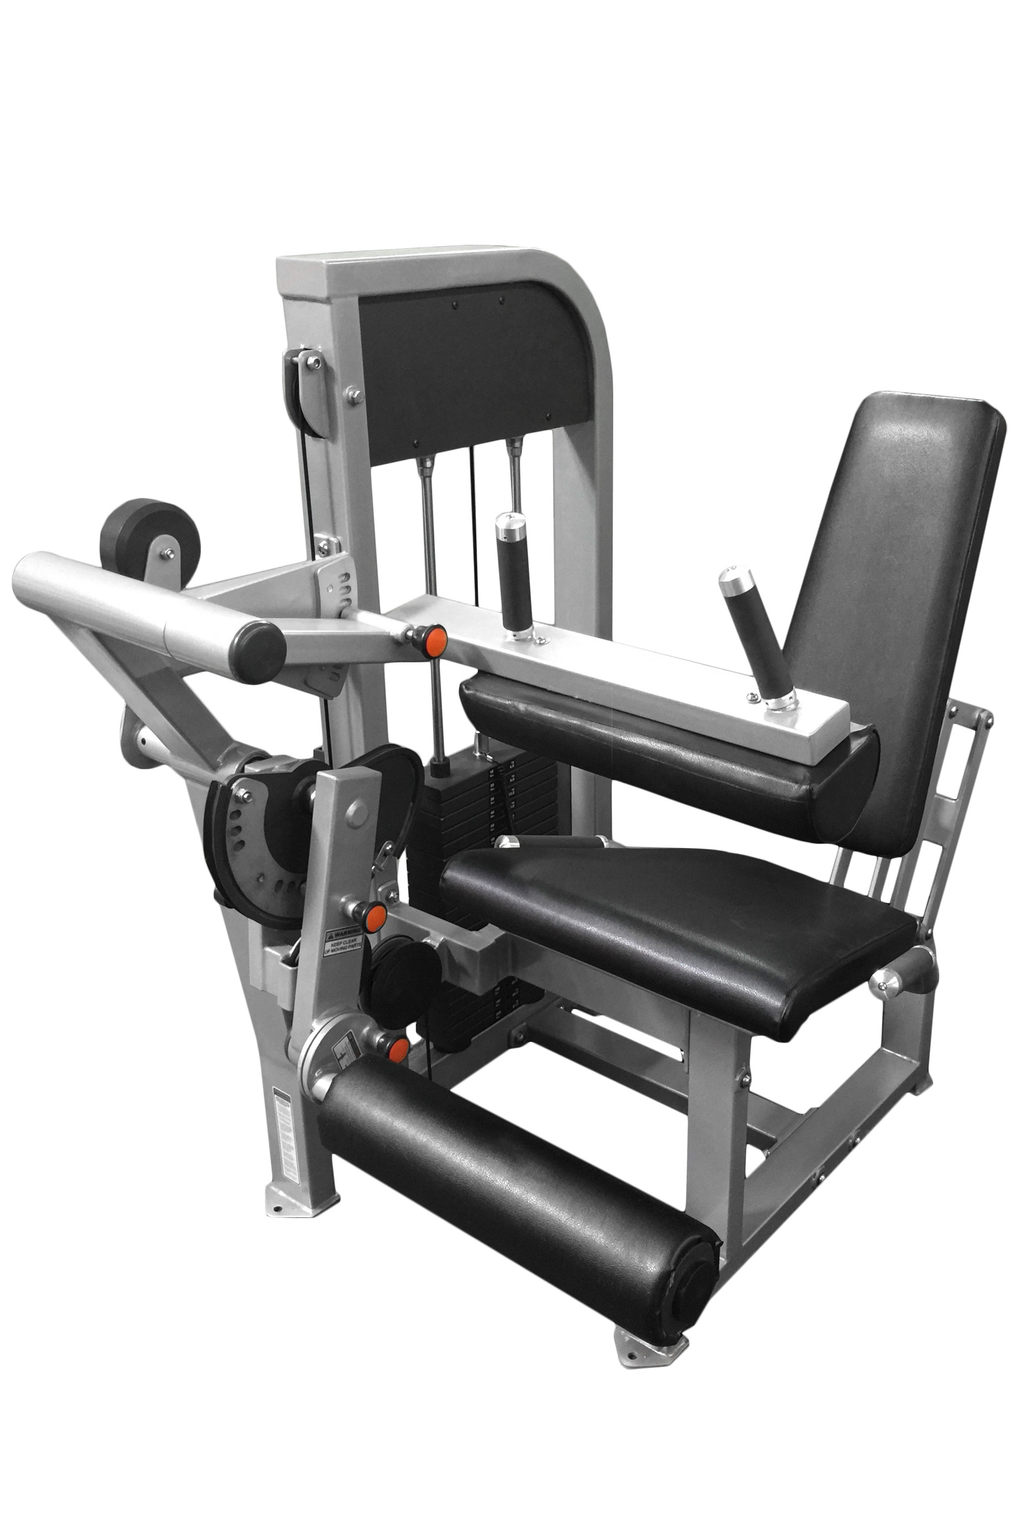 Leg Extension/Seated Leg Curl Combo - MD DUAL FUNCTION LINE